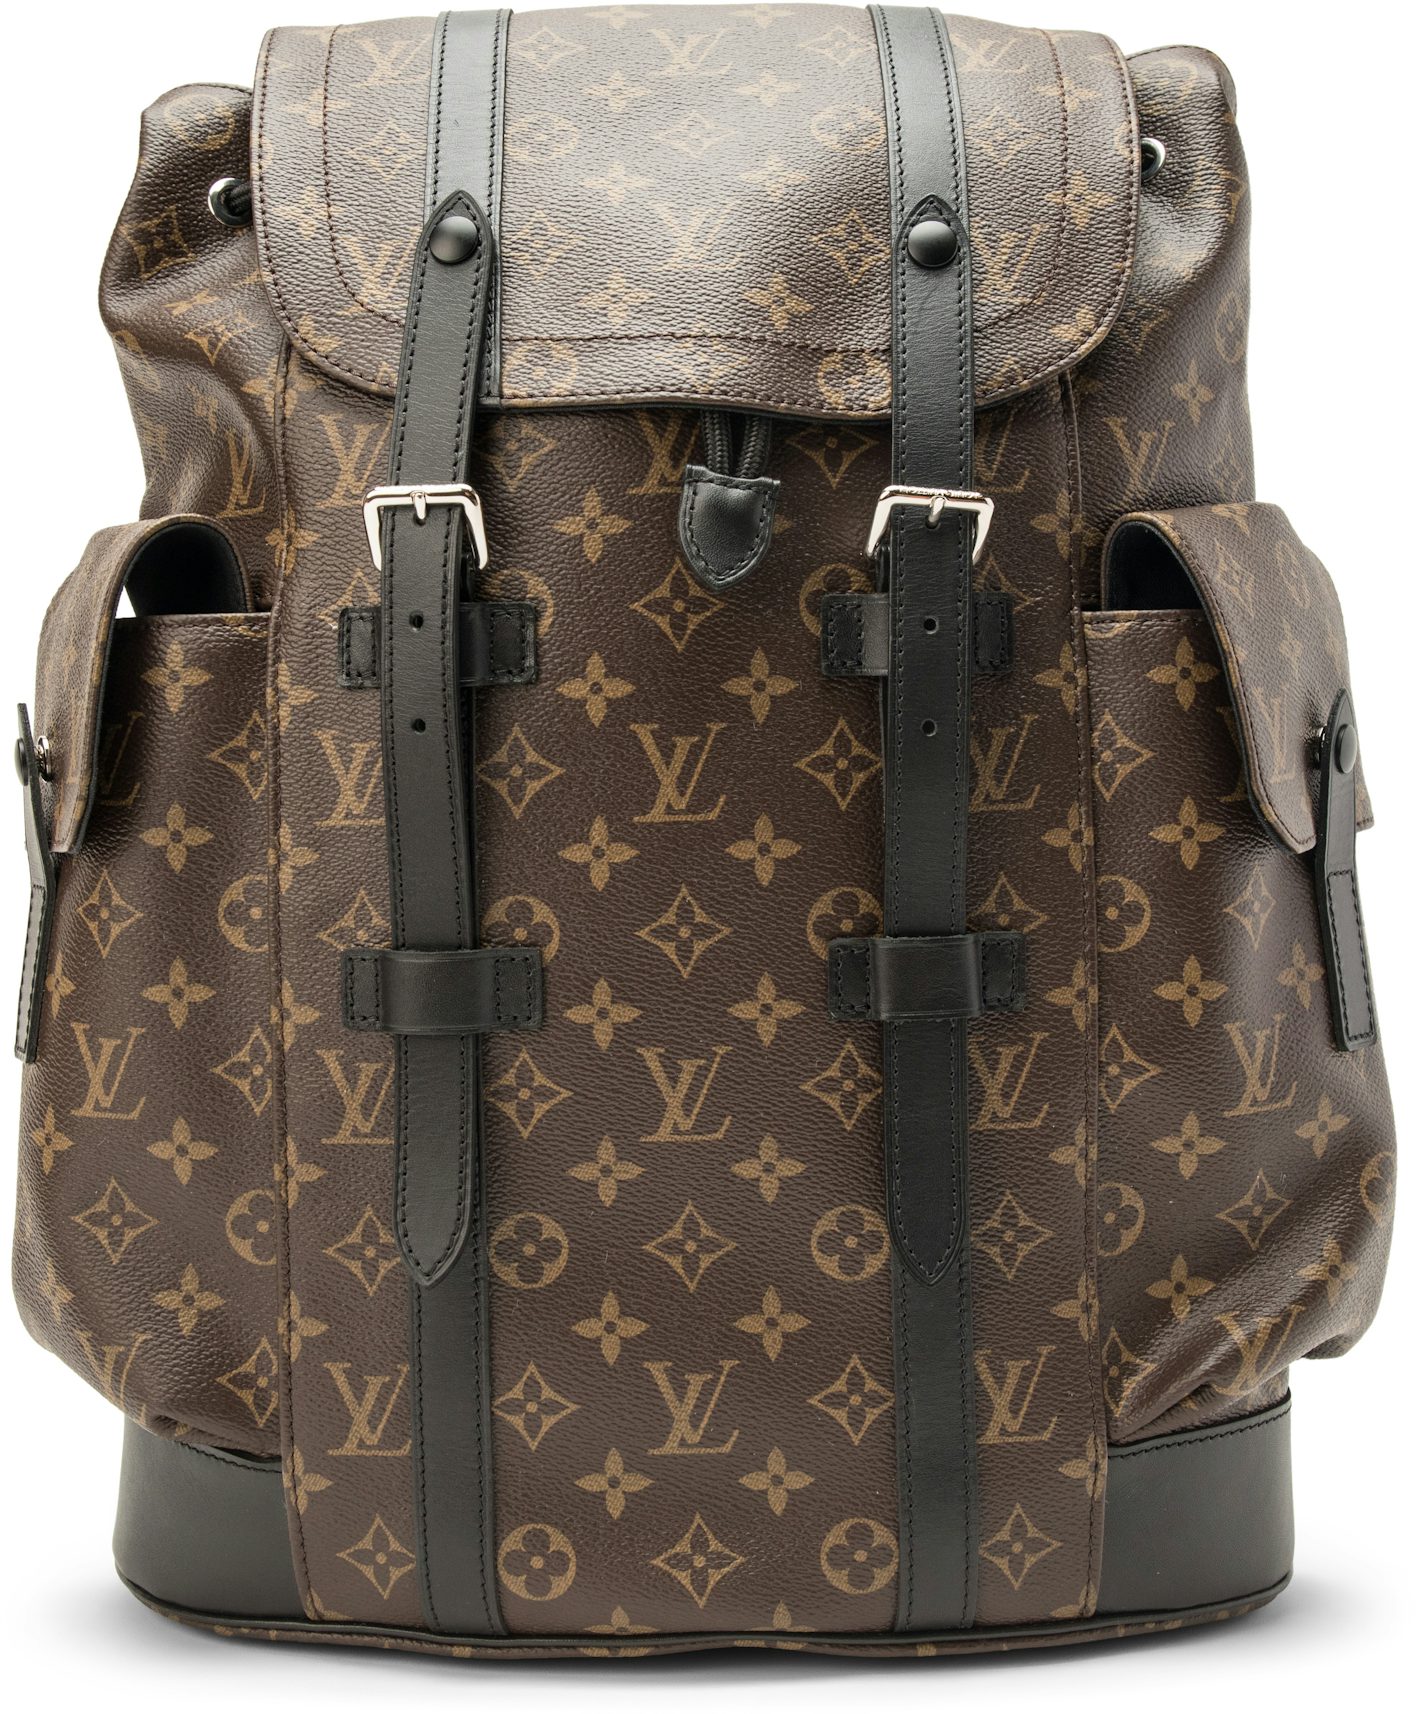 USED ** LOUIS VUITTON x SUPREME 100% AUTHENTIC LV CHRISTOPHER